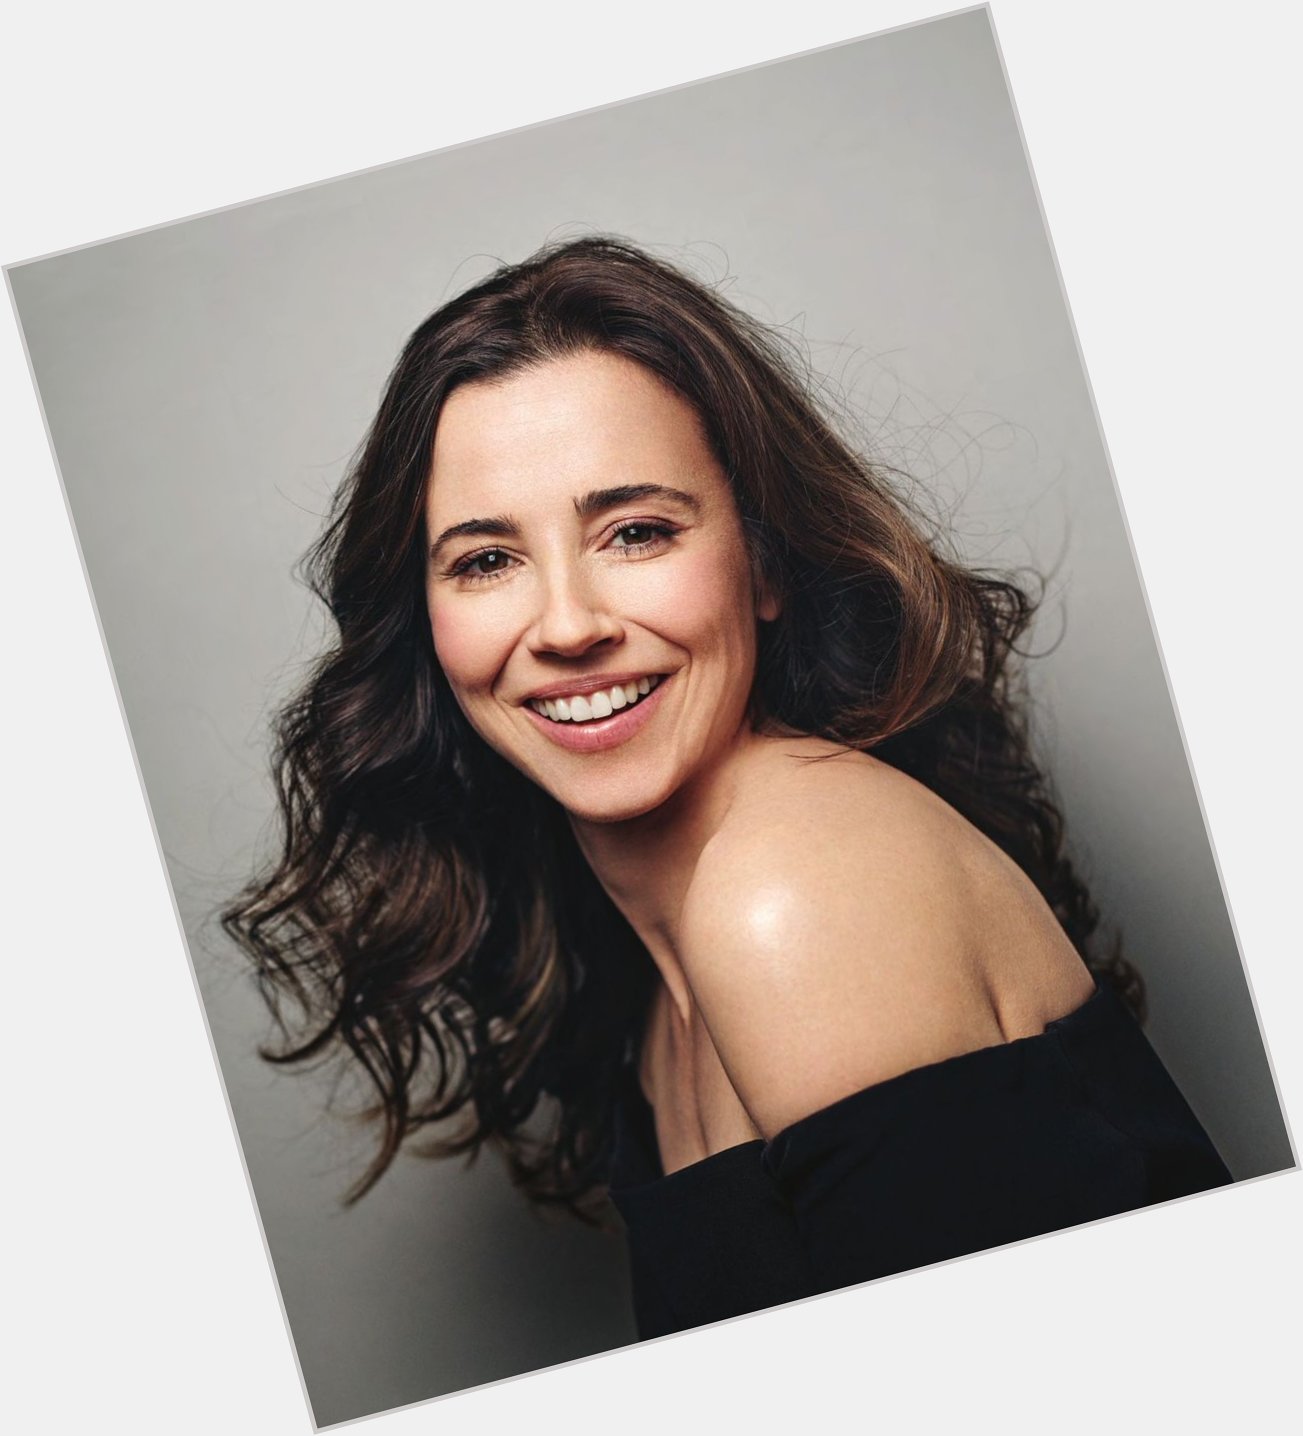 Happy birthday to the wonderful Linda Cardellini!!

Which is your favorite role from her? 